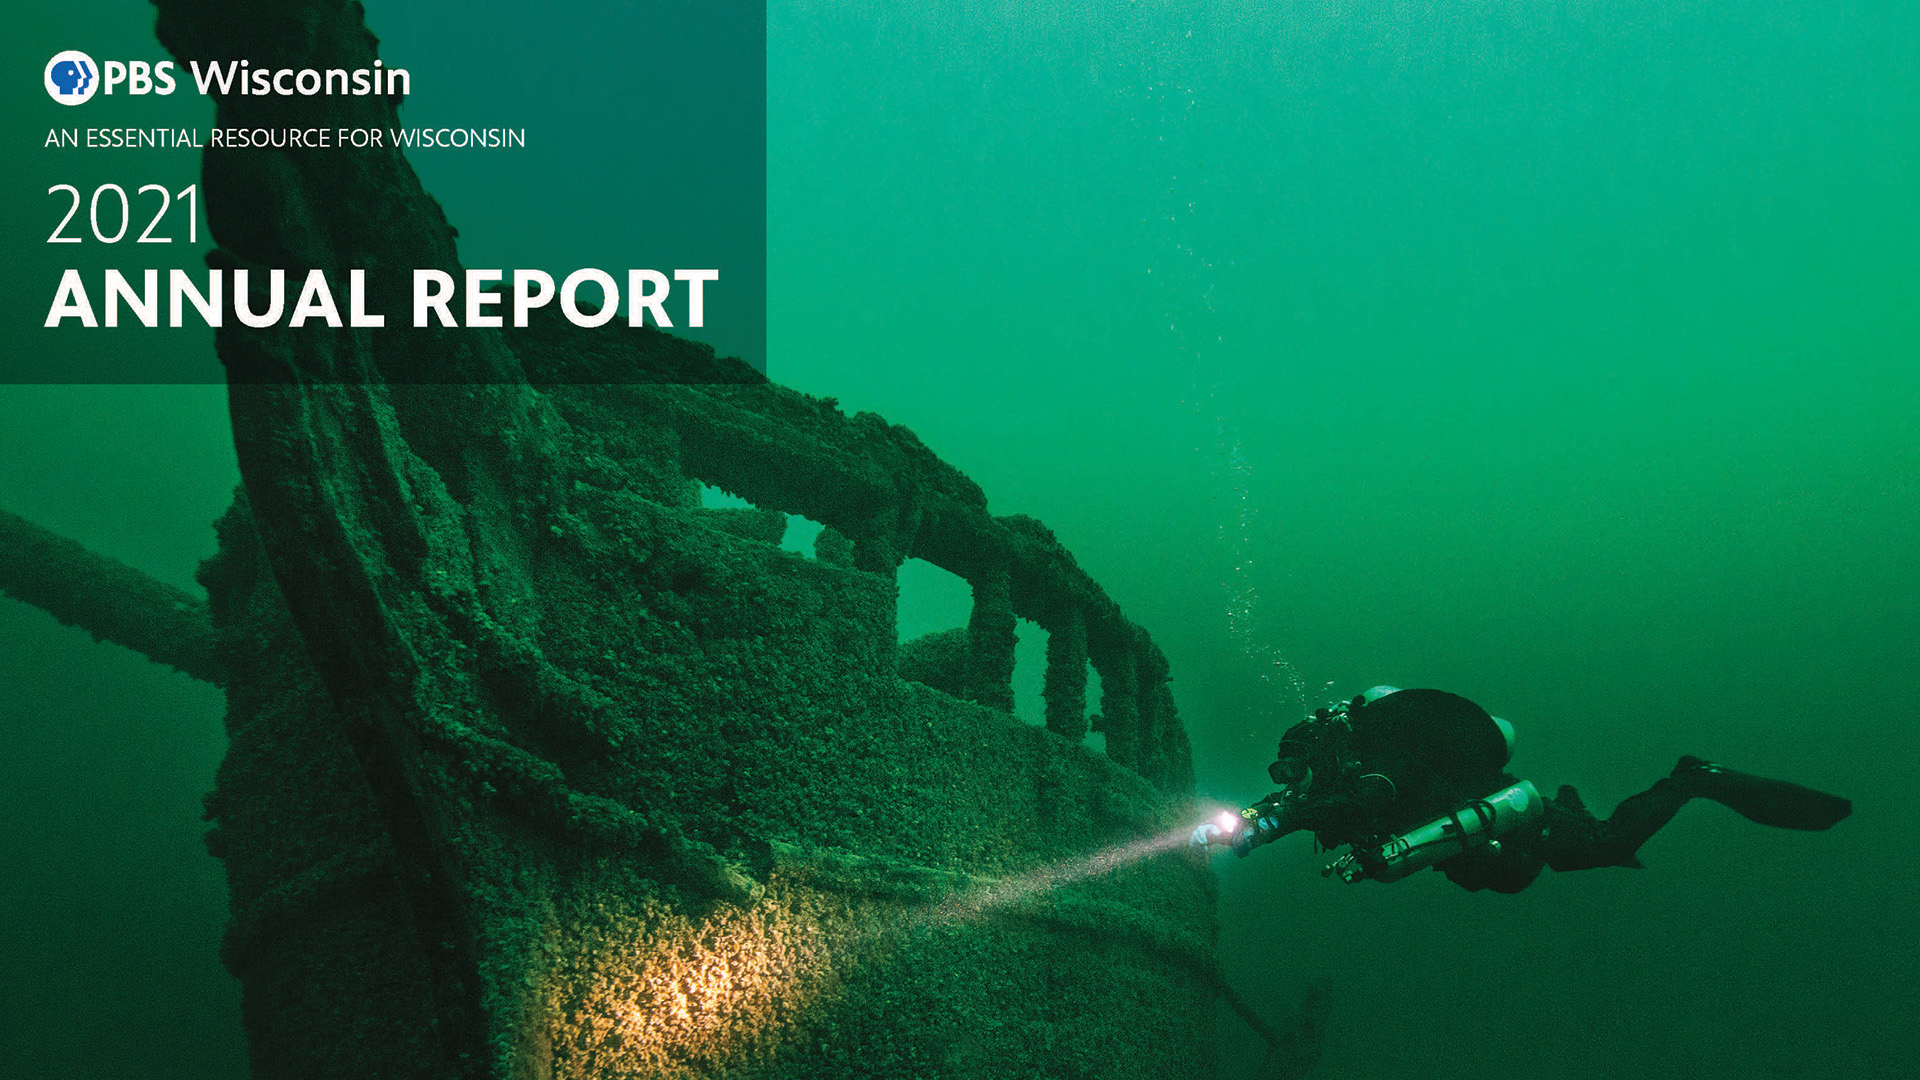 A cover of the PBS Wisconsin 2021 Annual Report featuring a sunken ship in The Great Lakes with a diver swimming close to it shining a flashlight